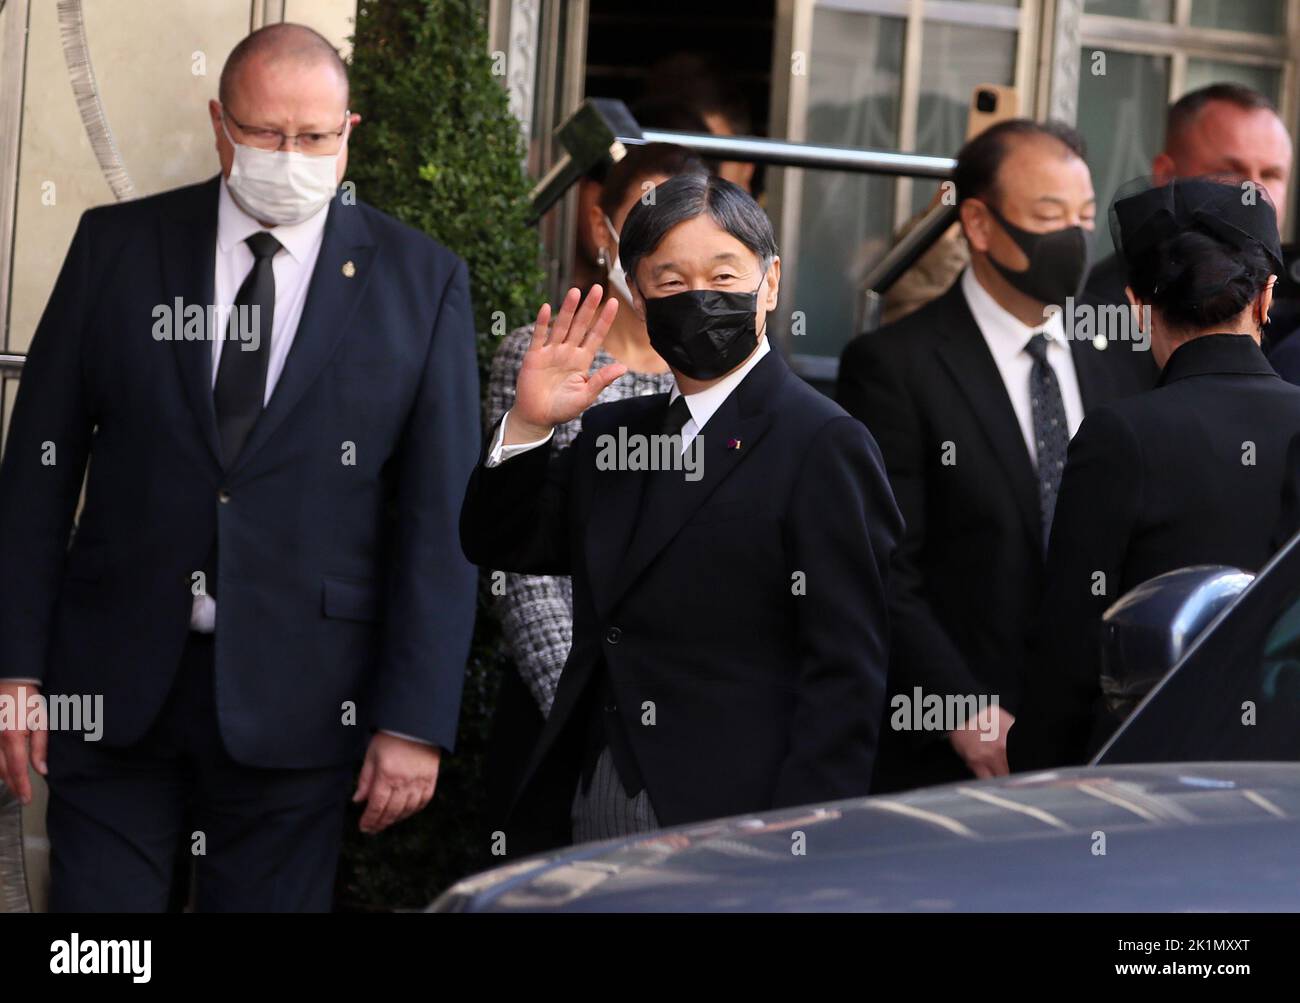 Emperor Naruhito of Japan arrives at Claridge's five star hotel in London after he attended the State Funeral of British Monarch Queen Elizabeth II. Stock Photo